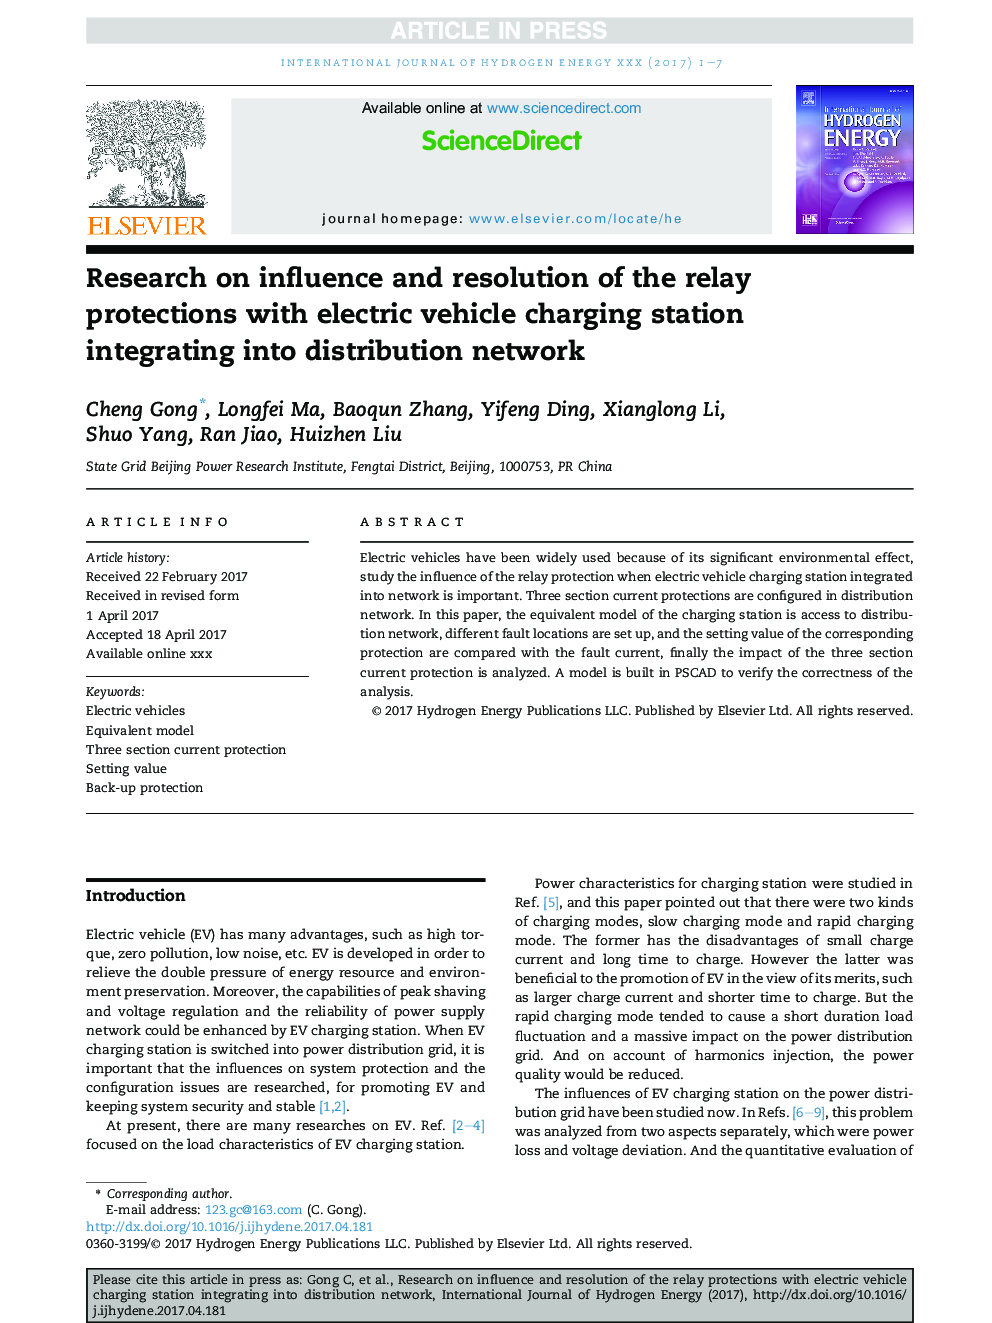 Research on influence and resolution of the relay protections with electric vehicle charging station integrating into distribution network